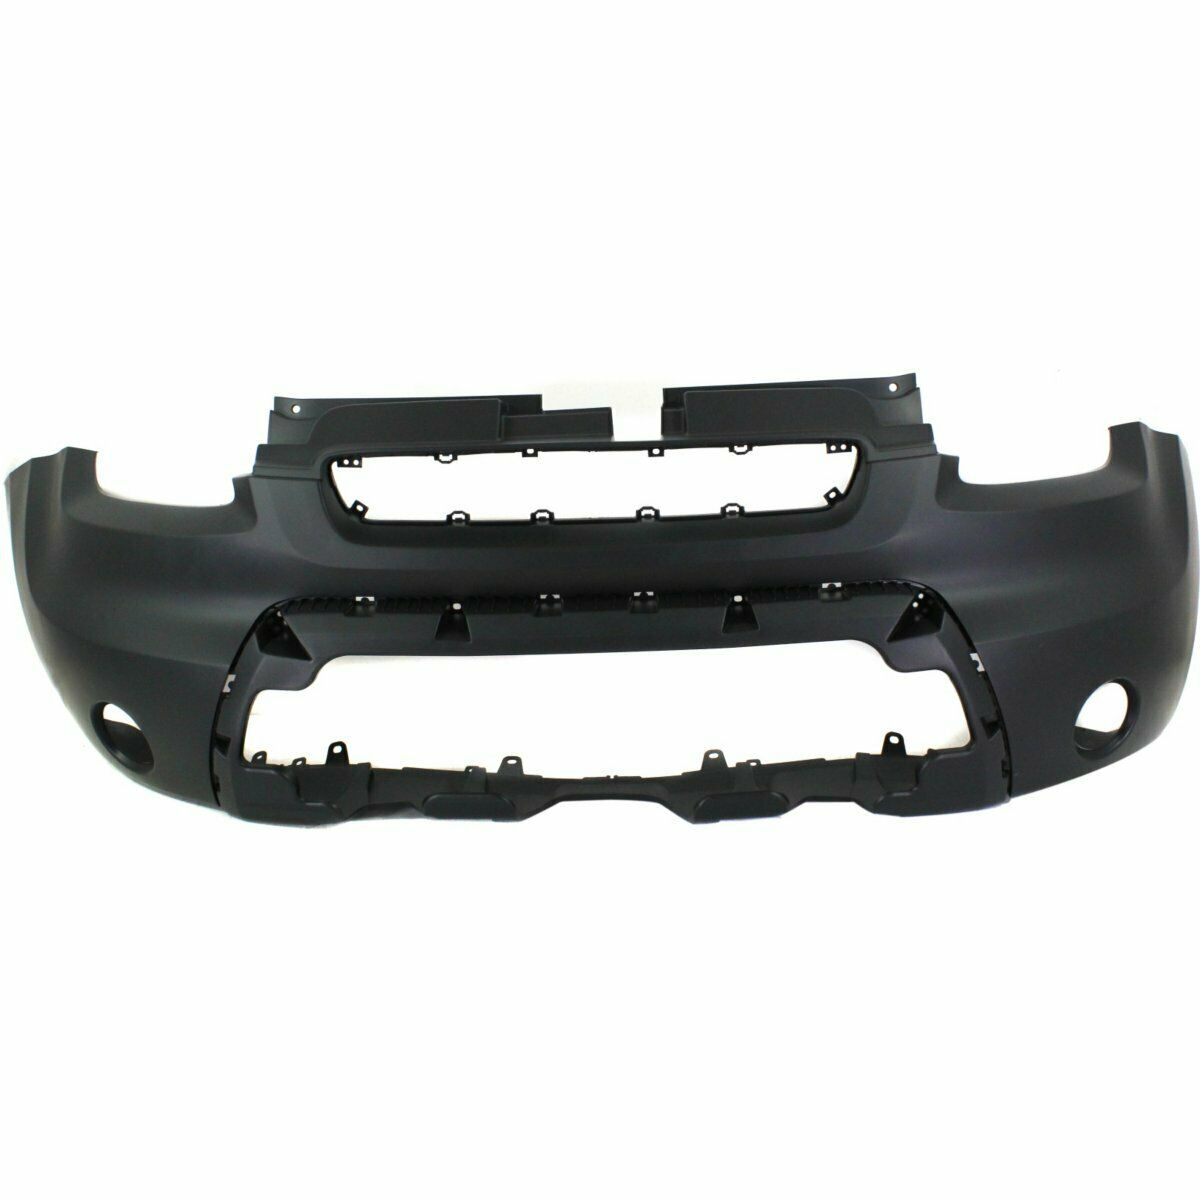 2010-2011 Kia Soul Front Bumper Painted to Match